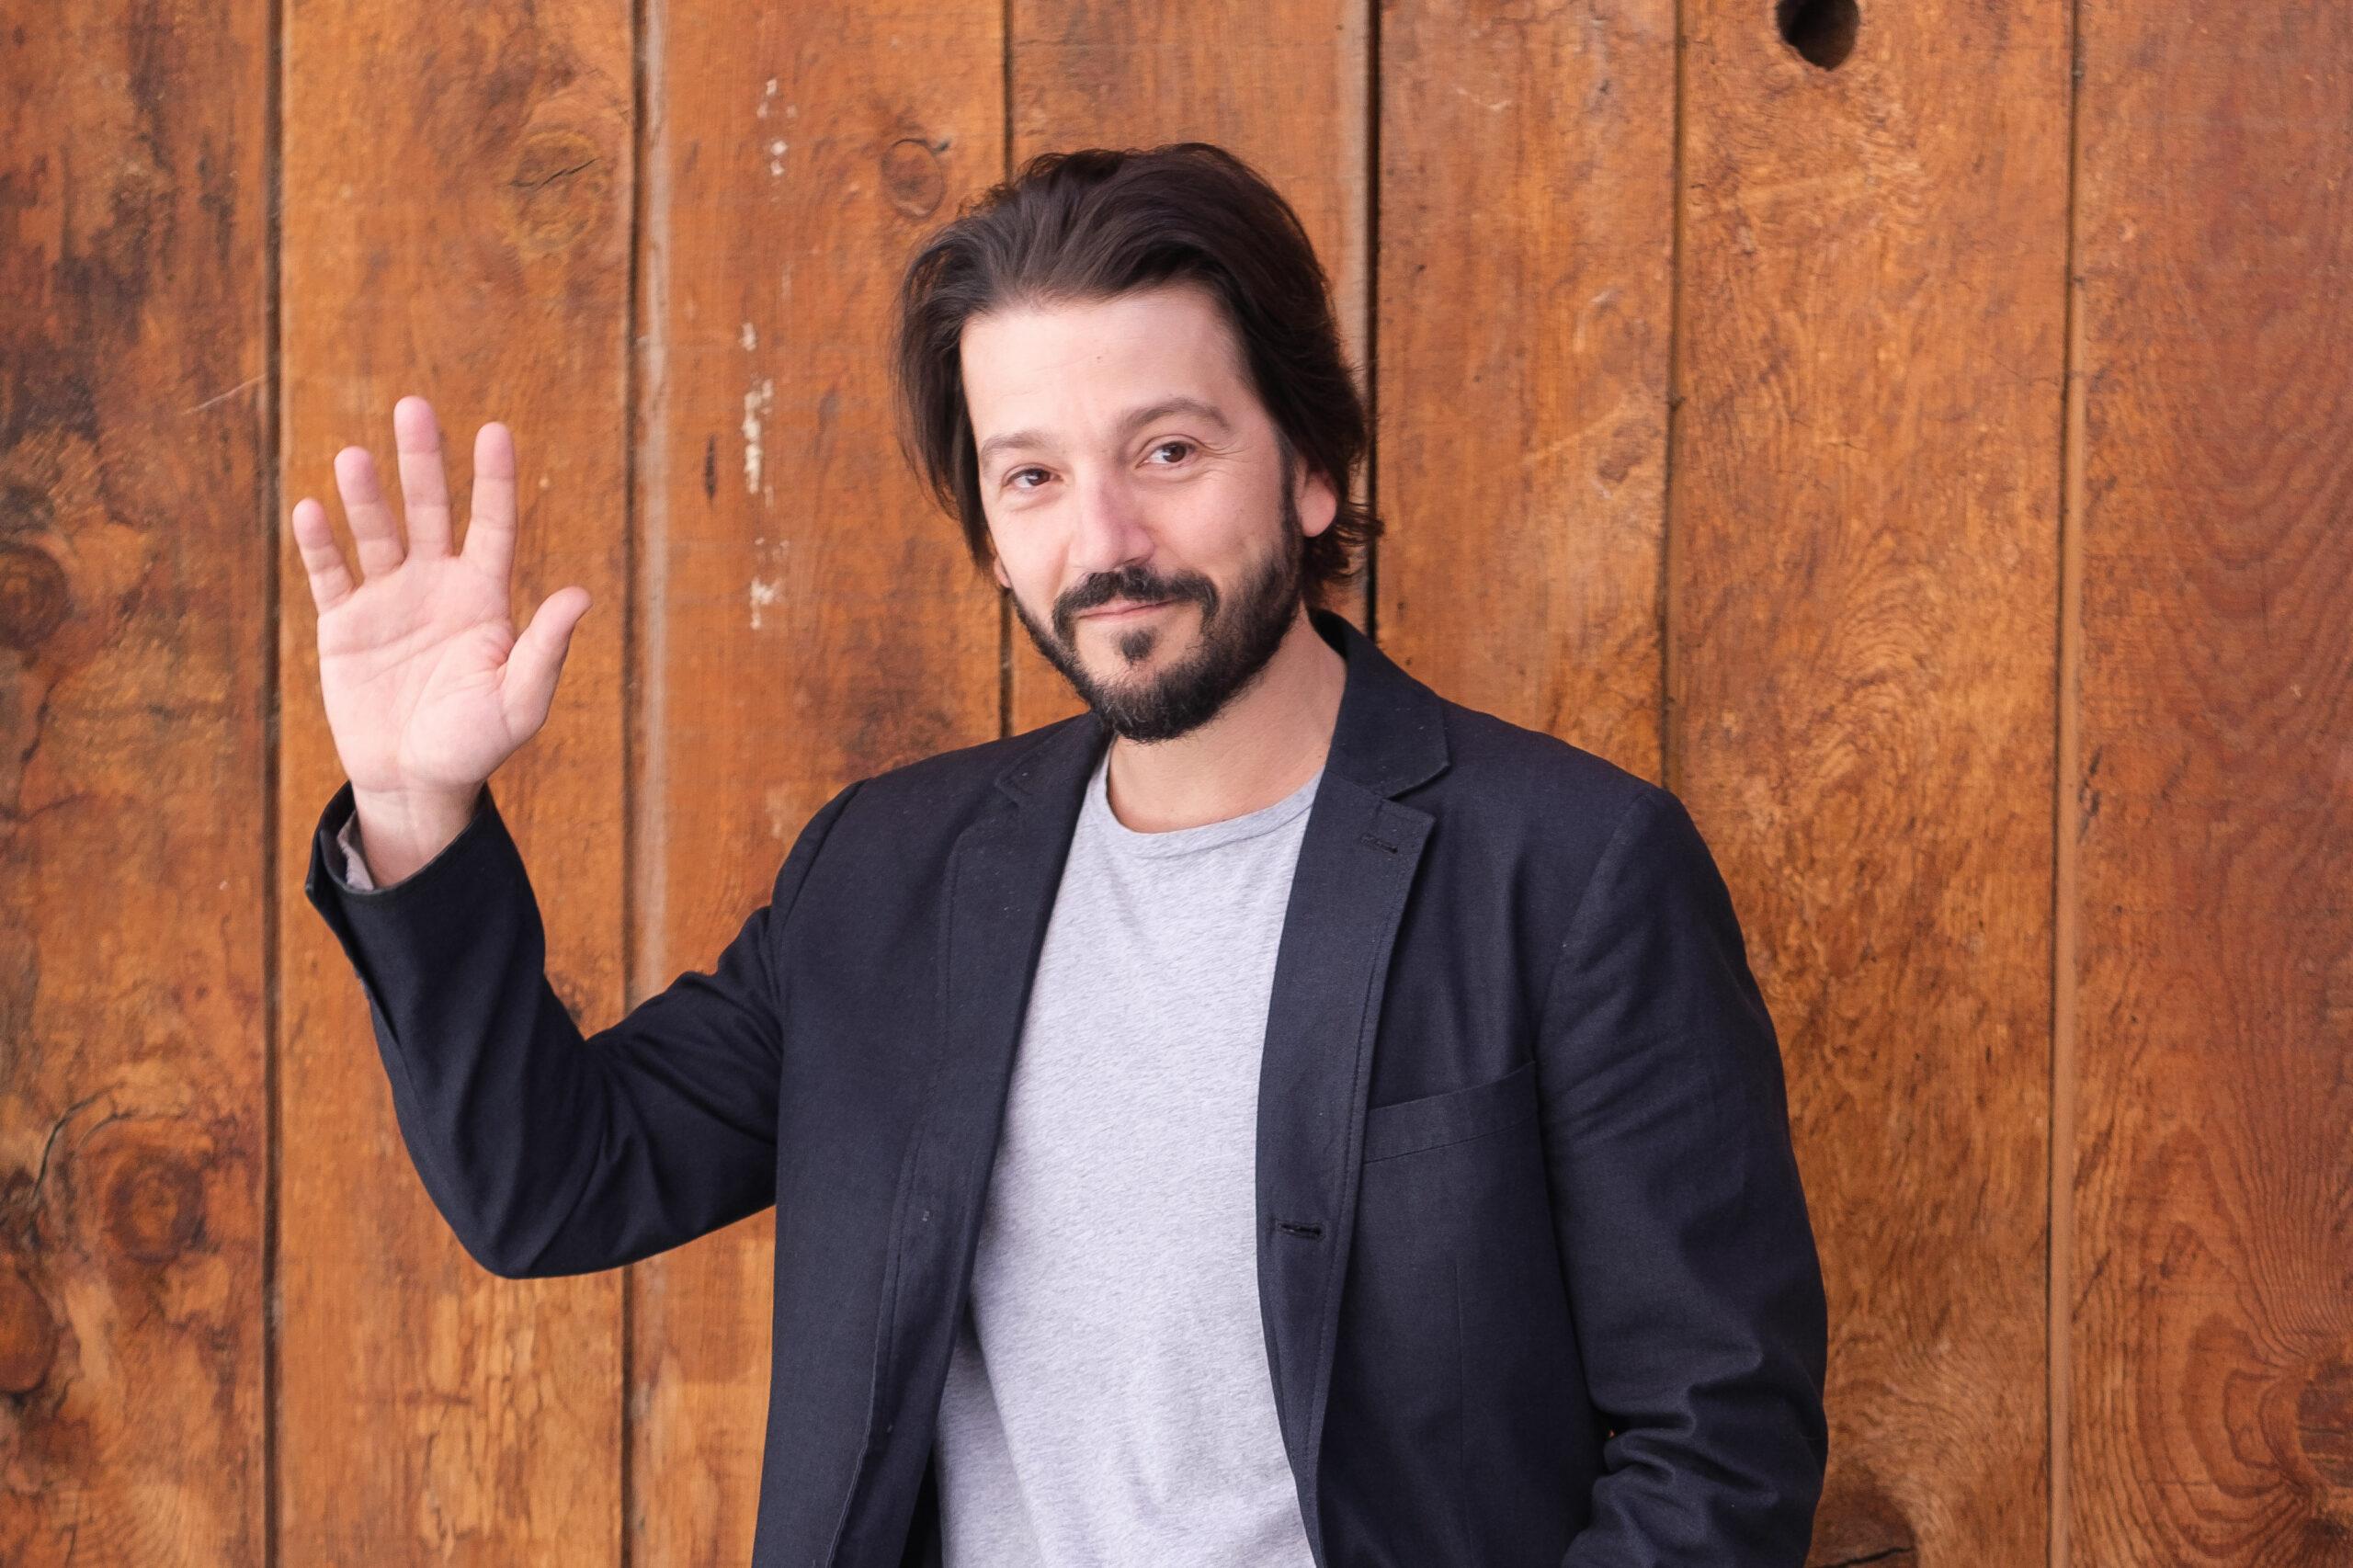 Mexican actor Diego Luna during the portrait session in Madrid, Spain - 22 Jun 2022